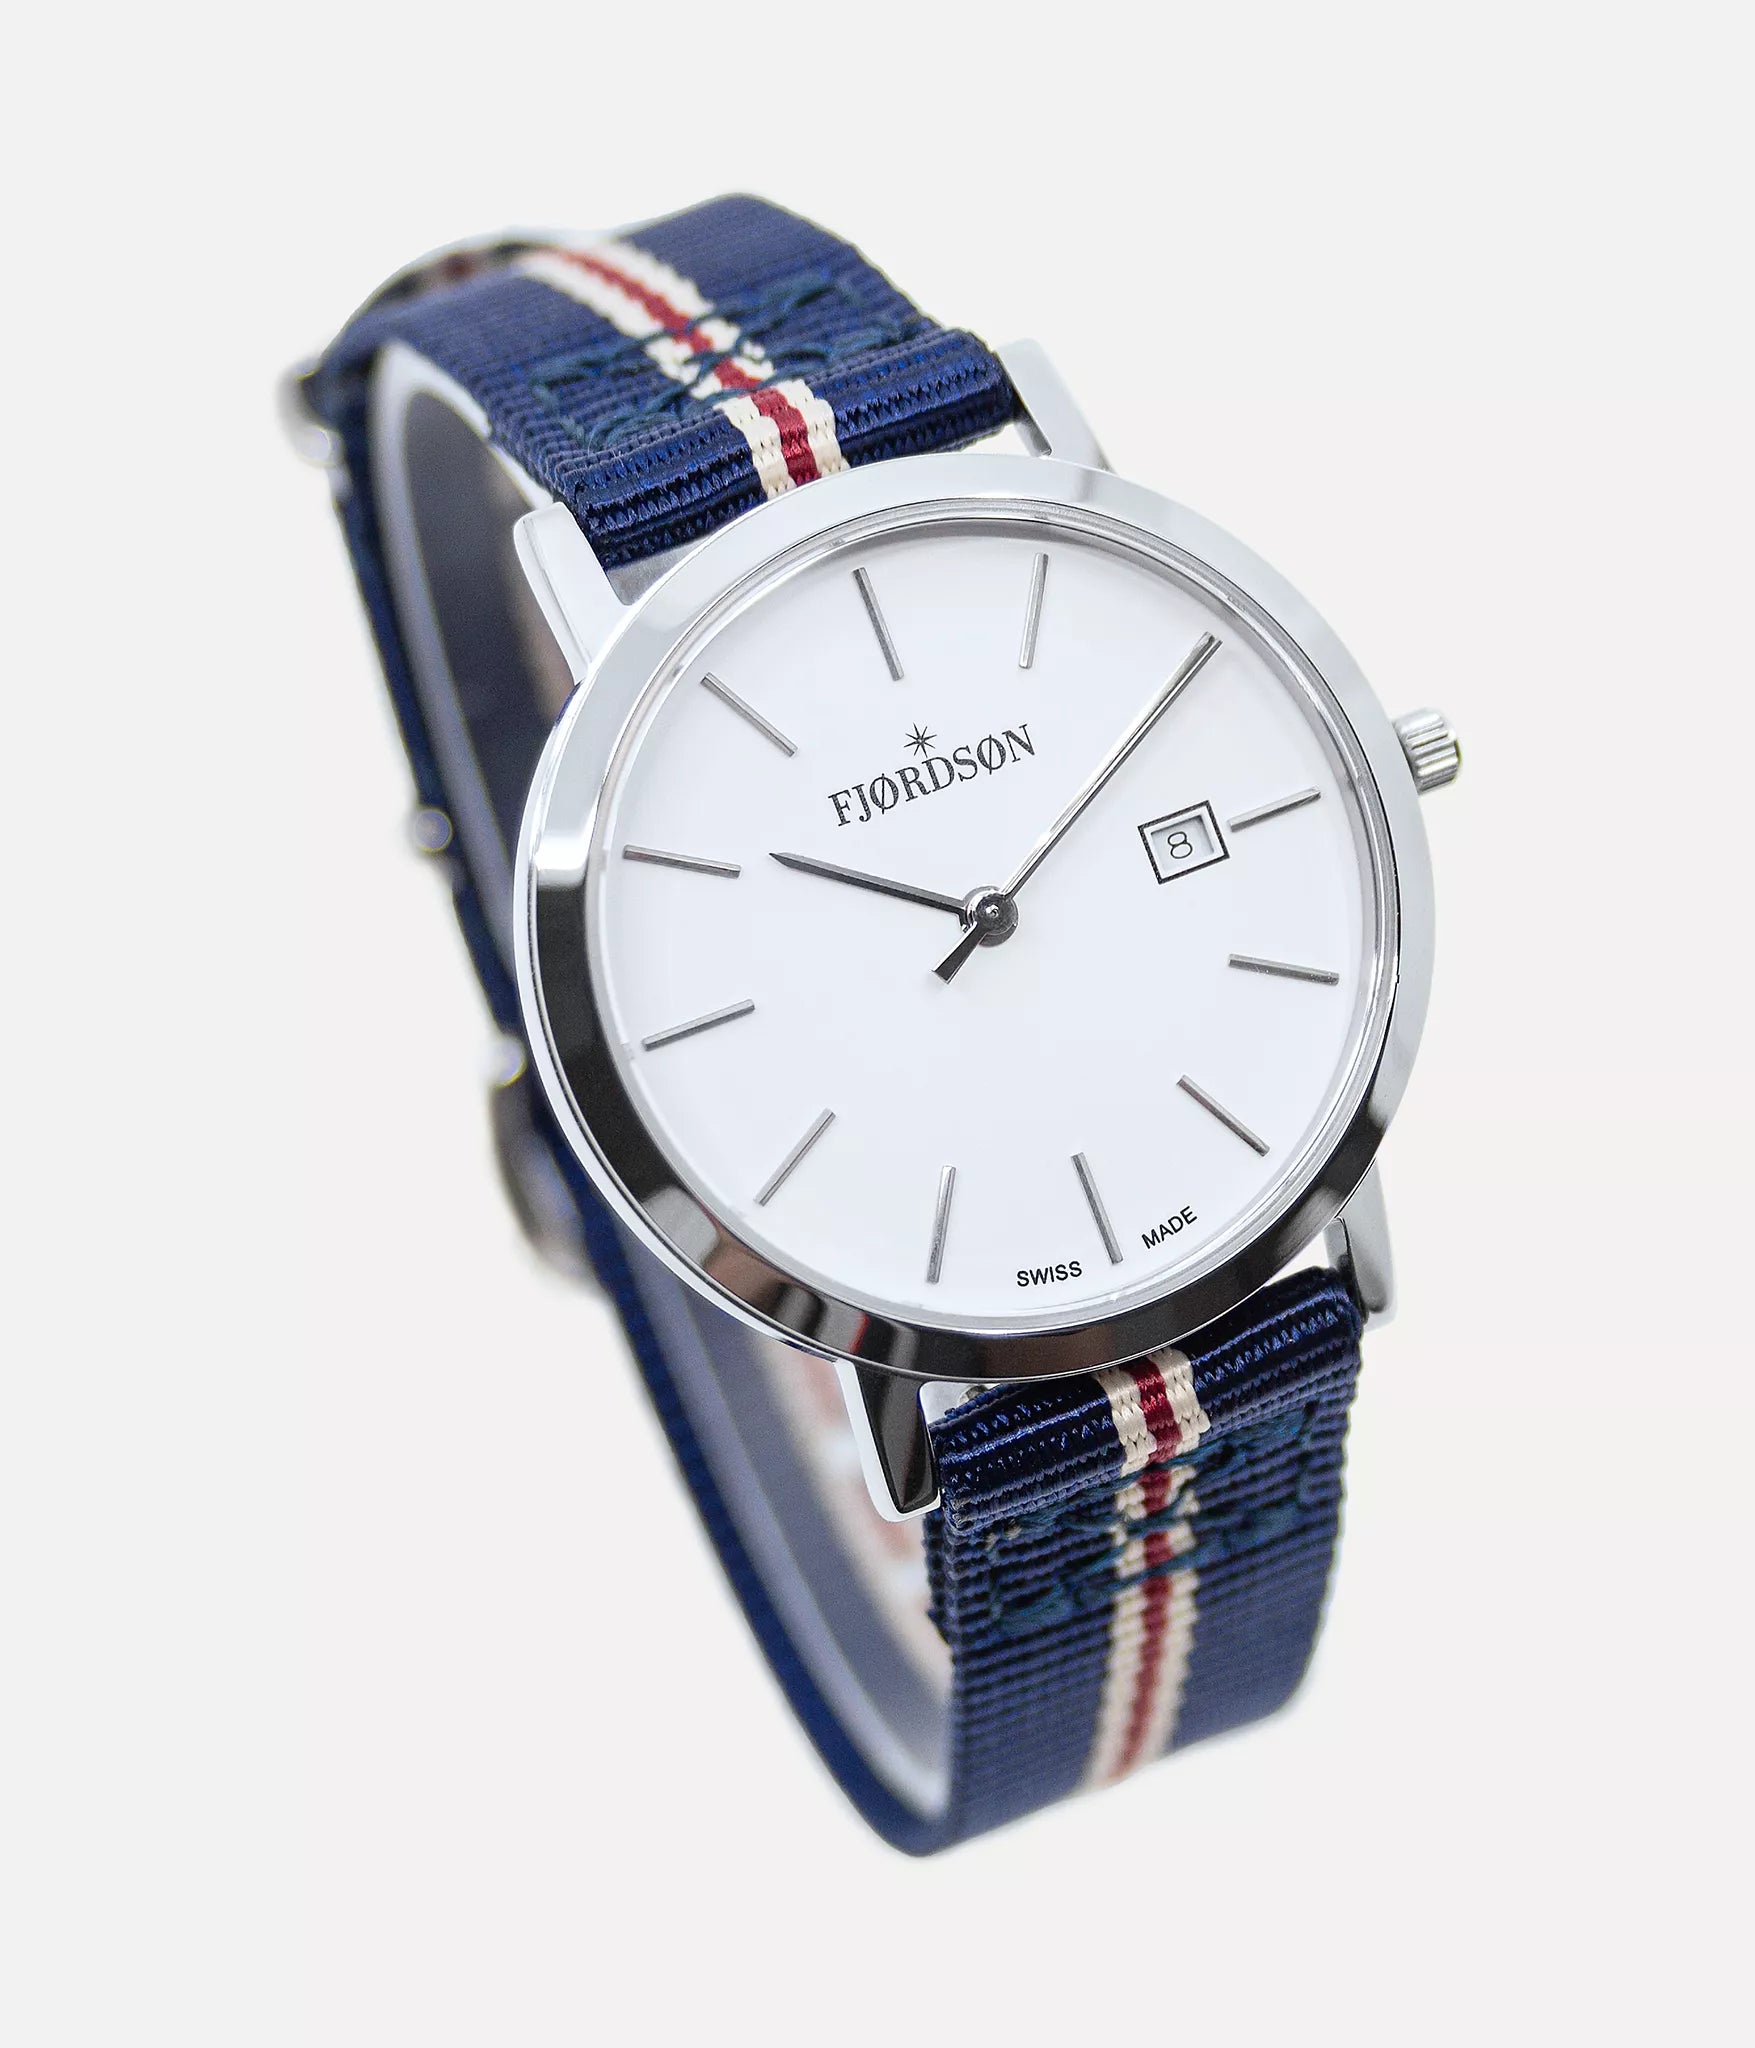 Strap on white dial watch - Fjordson Striped Navy Blue Nato Watch strap silver buckle - WOMEN - vegan & approved by PETA - Swiss made